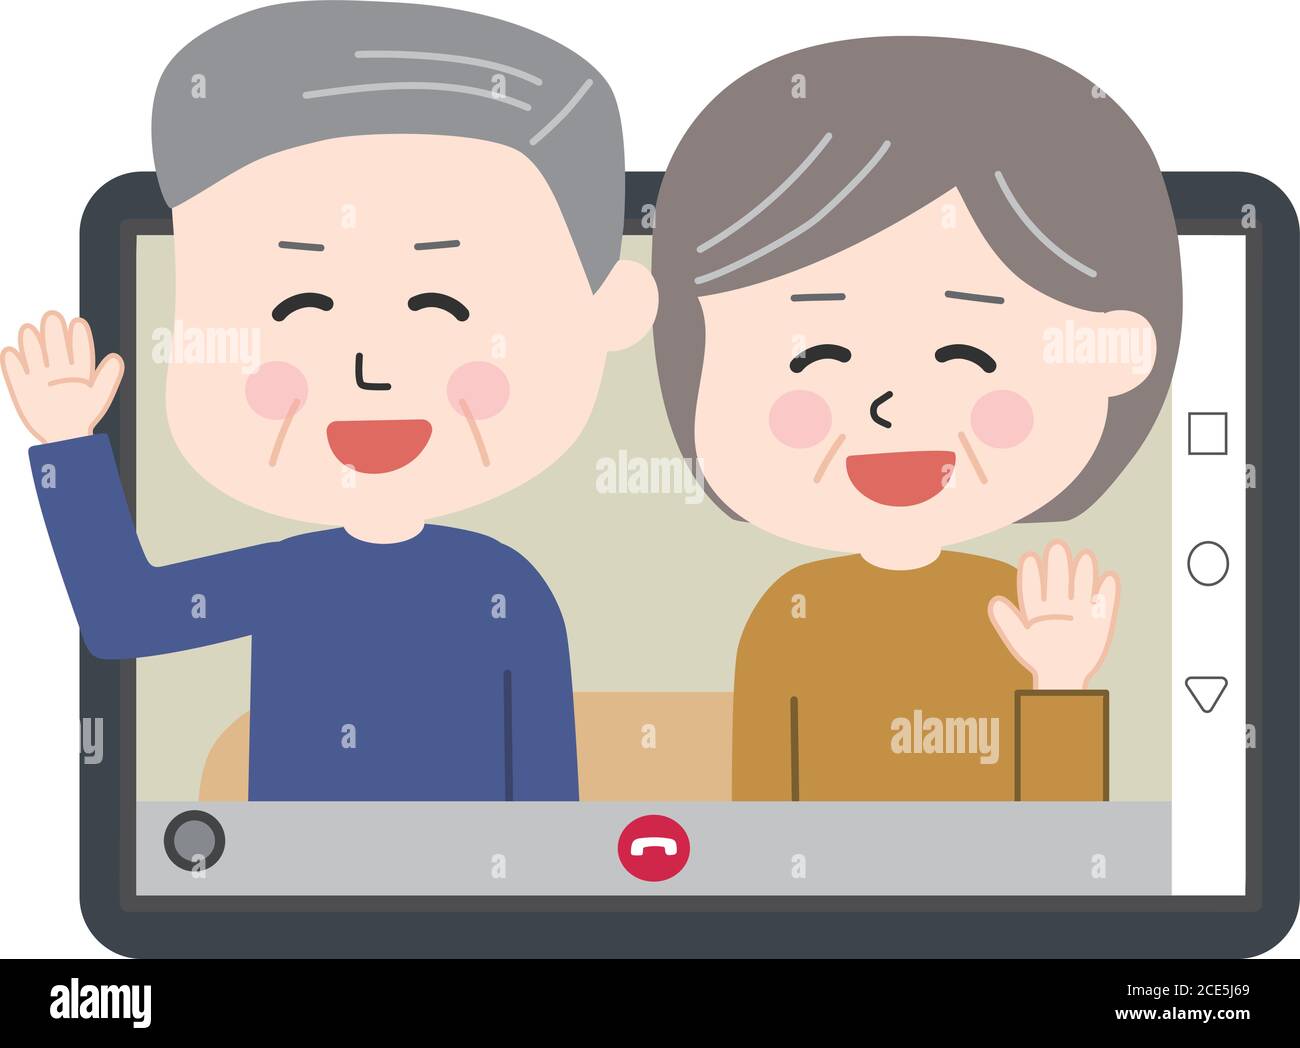 Elderly couple sitting on the sofa and having video call on tablet or smartphone. Vector illustration isolated on white background. Stock Vector